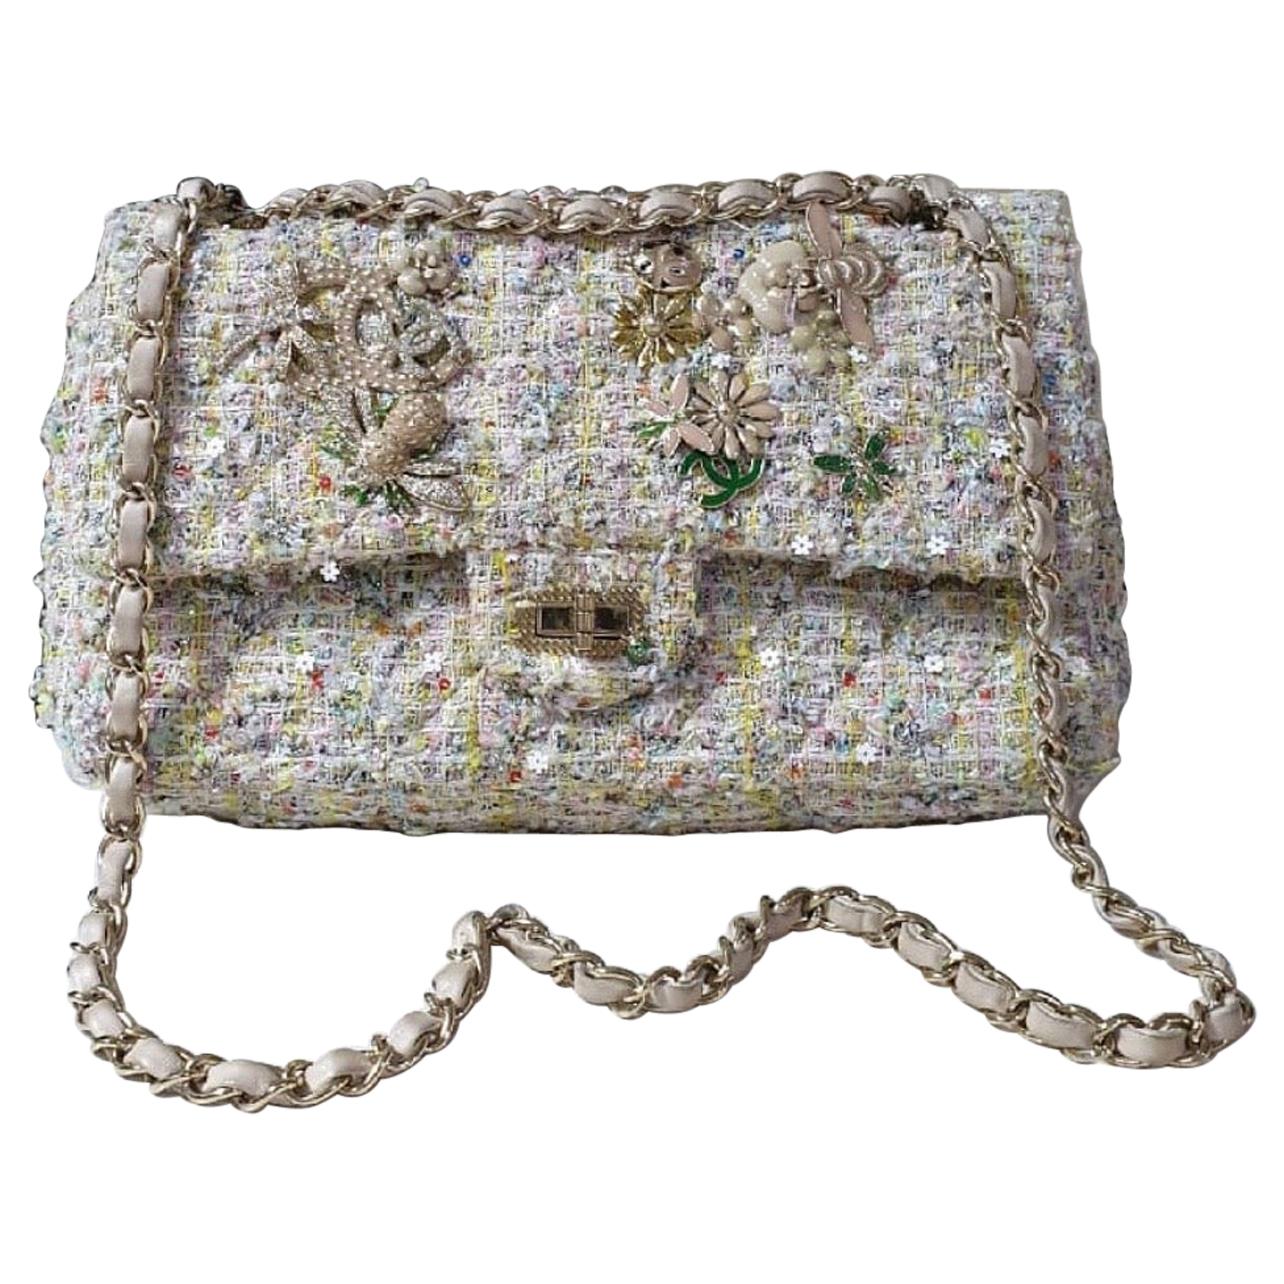 Chanel Reissue 225 Tweed Pastel Garden Party Flap – Coco Approved